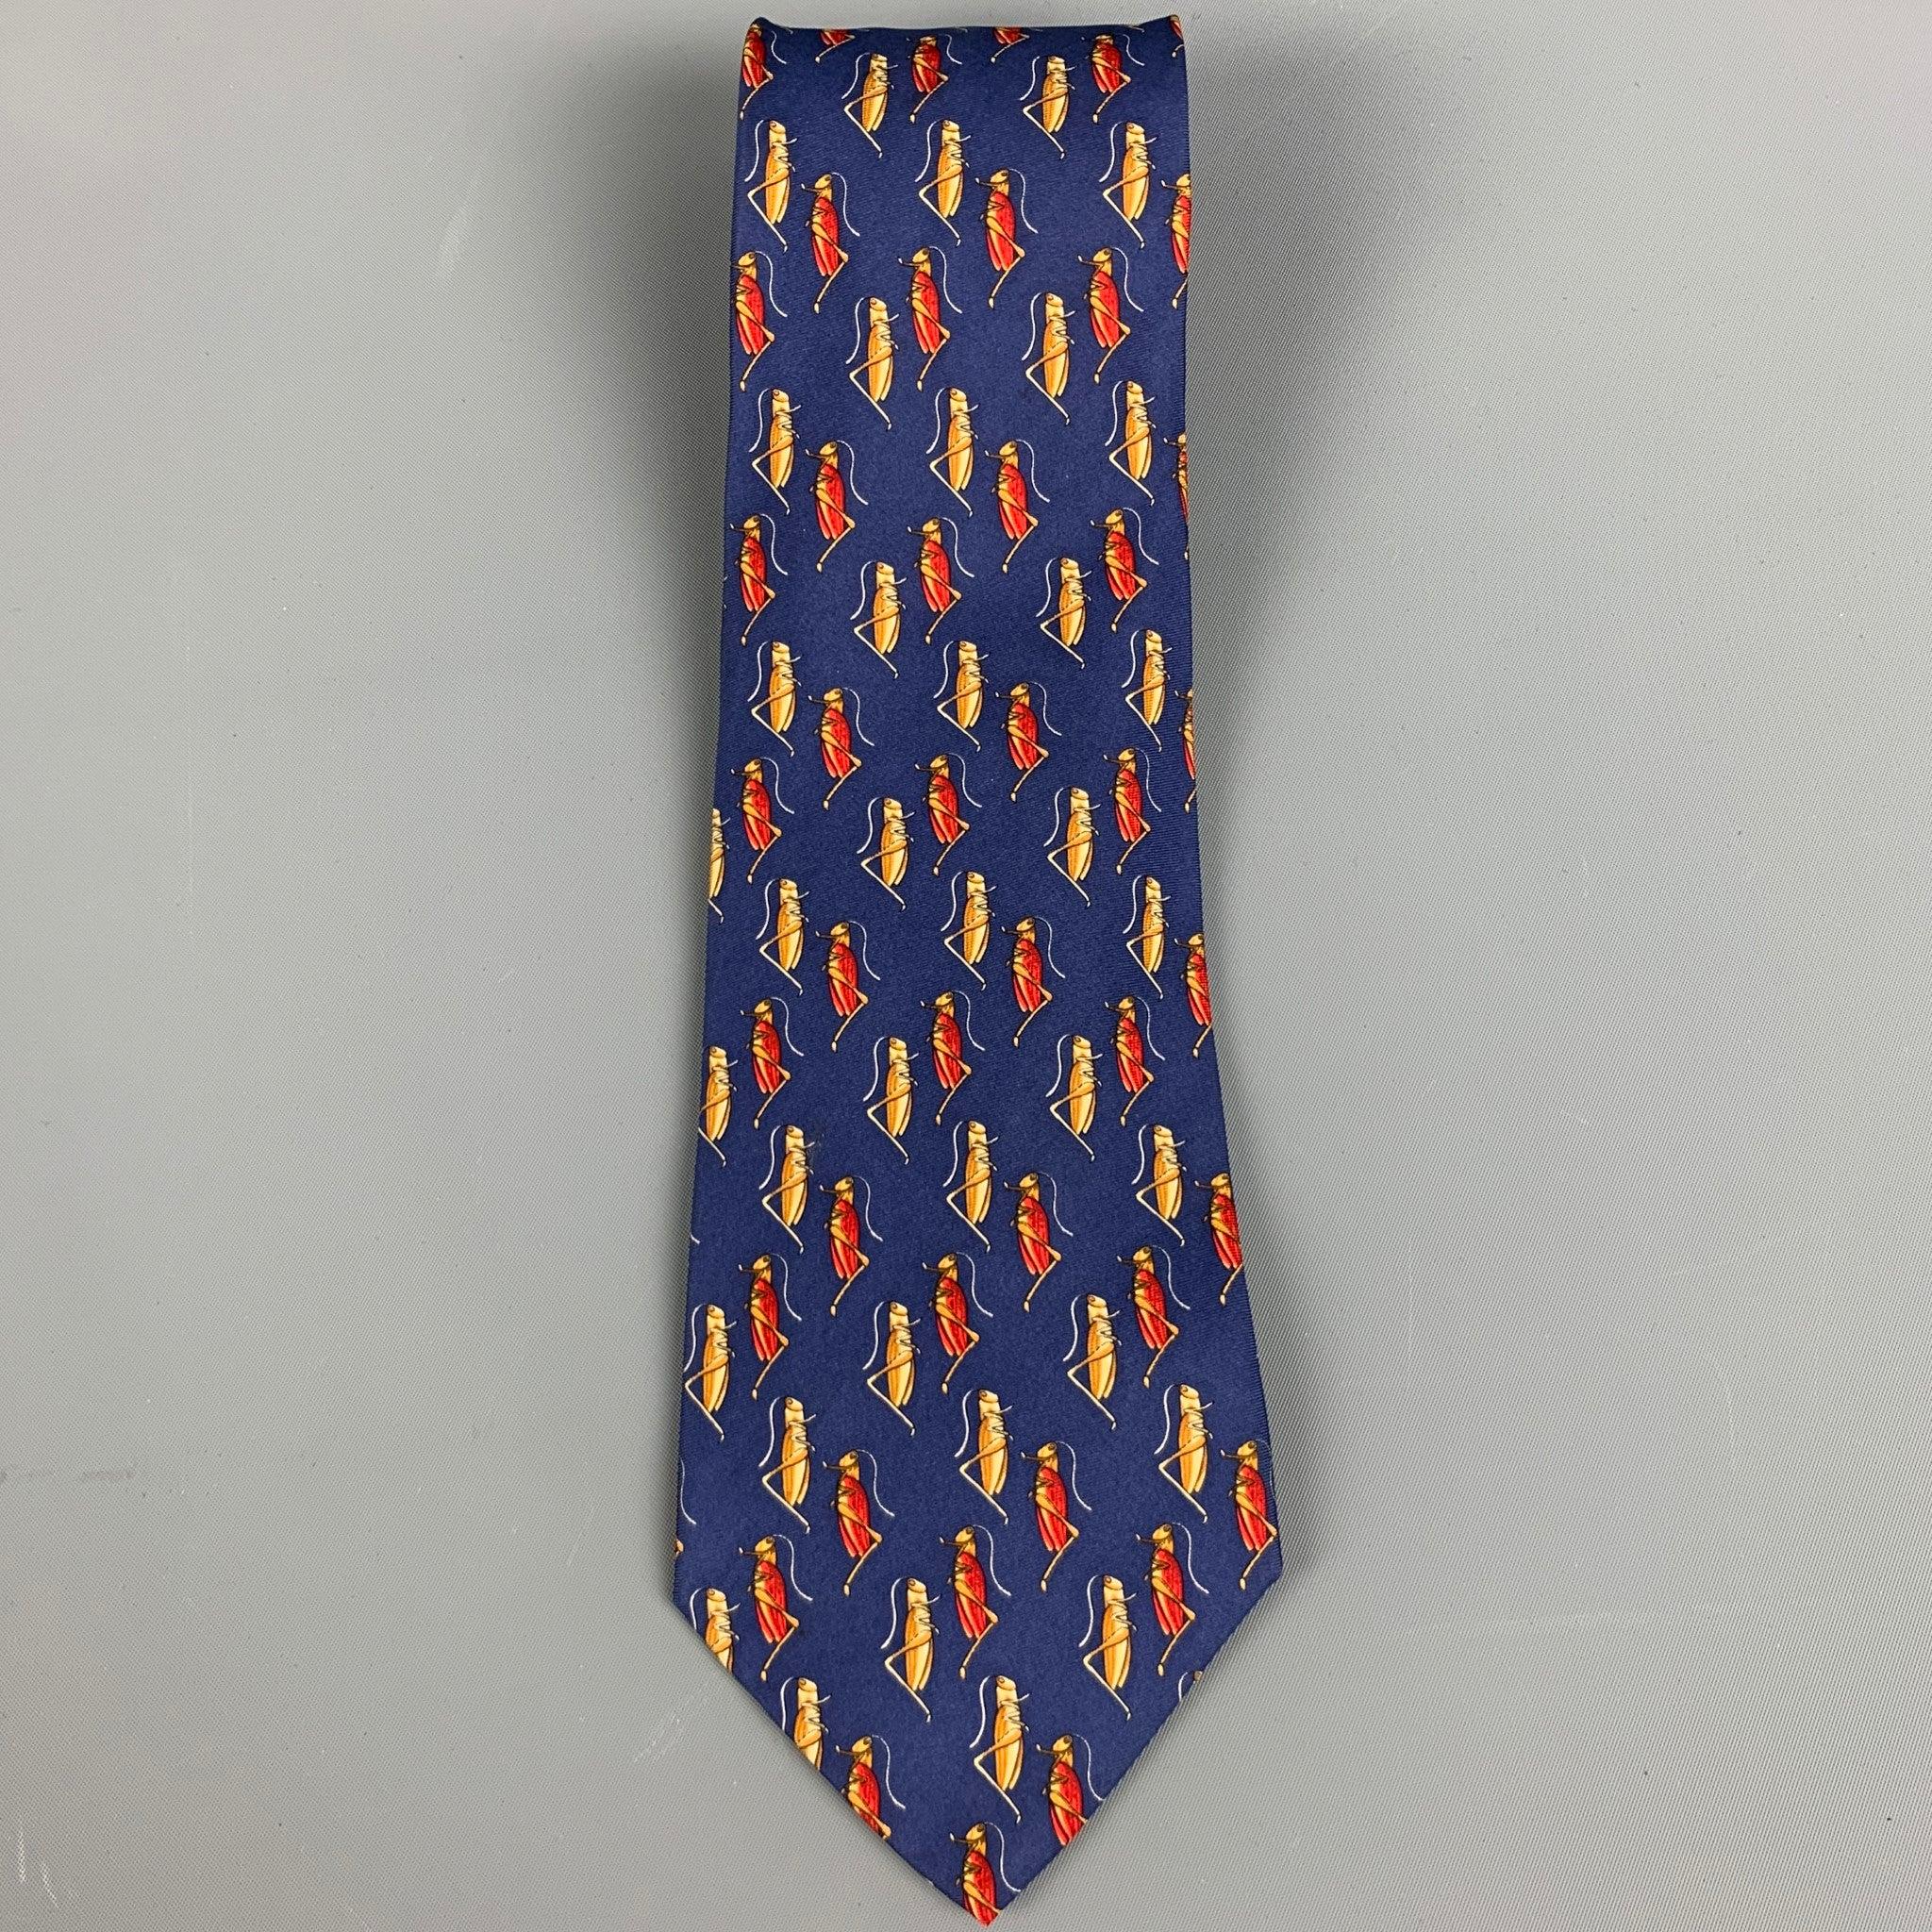 TIFFANY & CO.
necktie in a blue silk fabric featuring red and yellow grasshopper pattern. Made in Italy.Excellent Pre-Owned Condition. 

Measurements: 
  Width: 3.5 inches Length: 58 inches 
  
  
 
Reference: 128077
Category: Tie
More Details
   